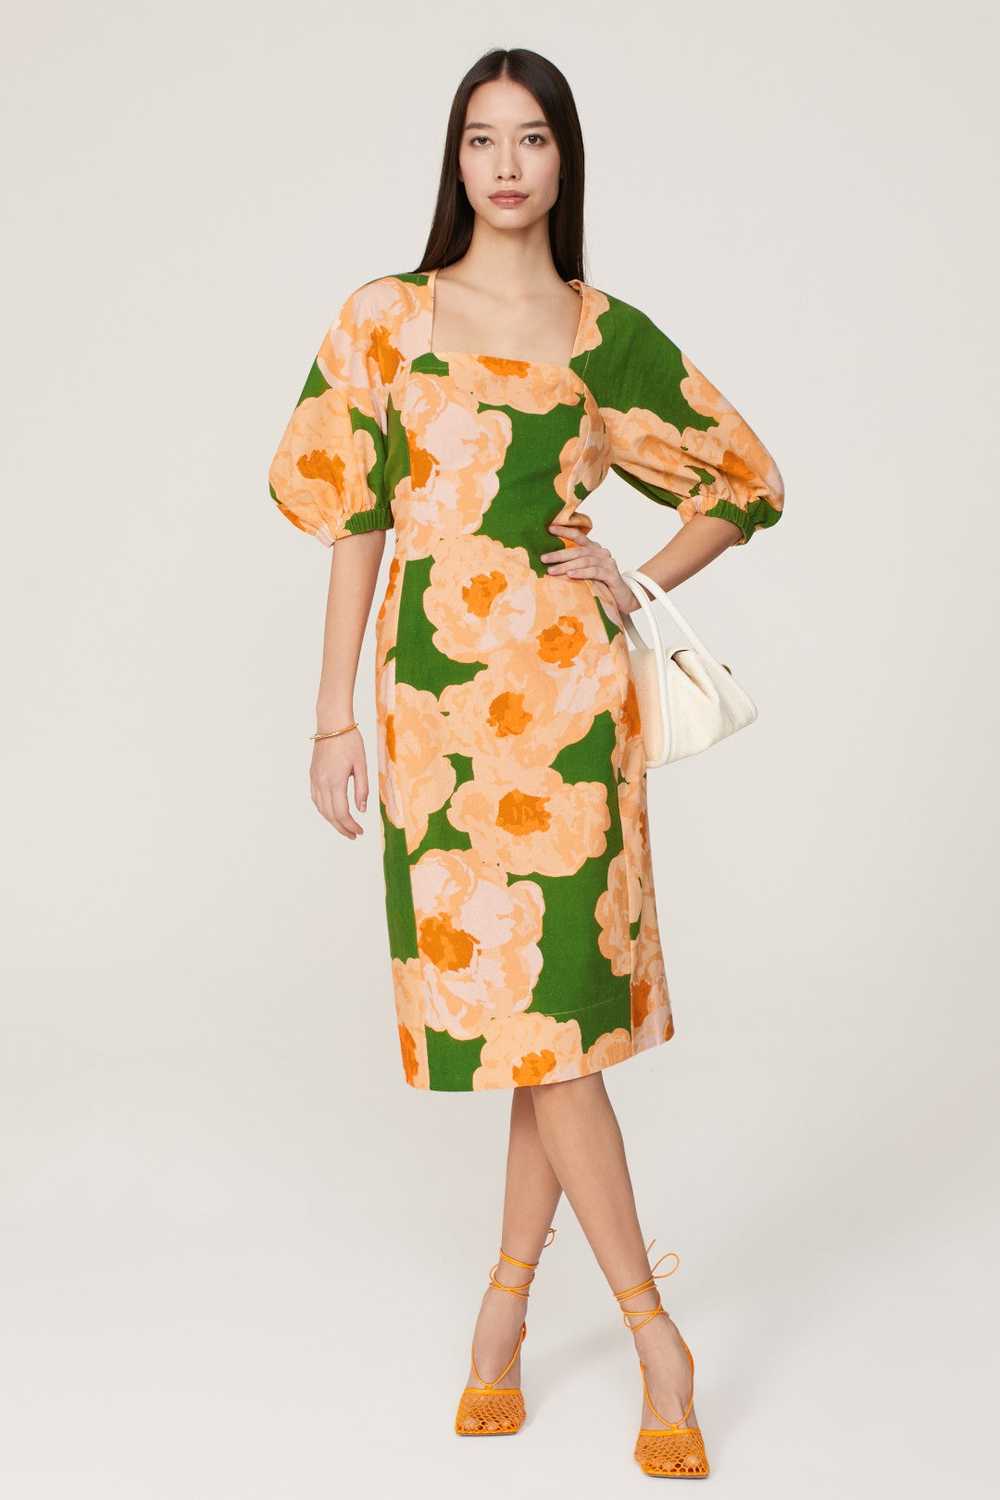 Eudon Choi Collective Puff Sleeve Dress - image 1